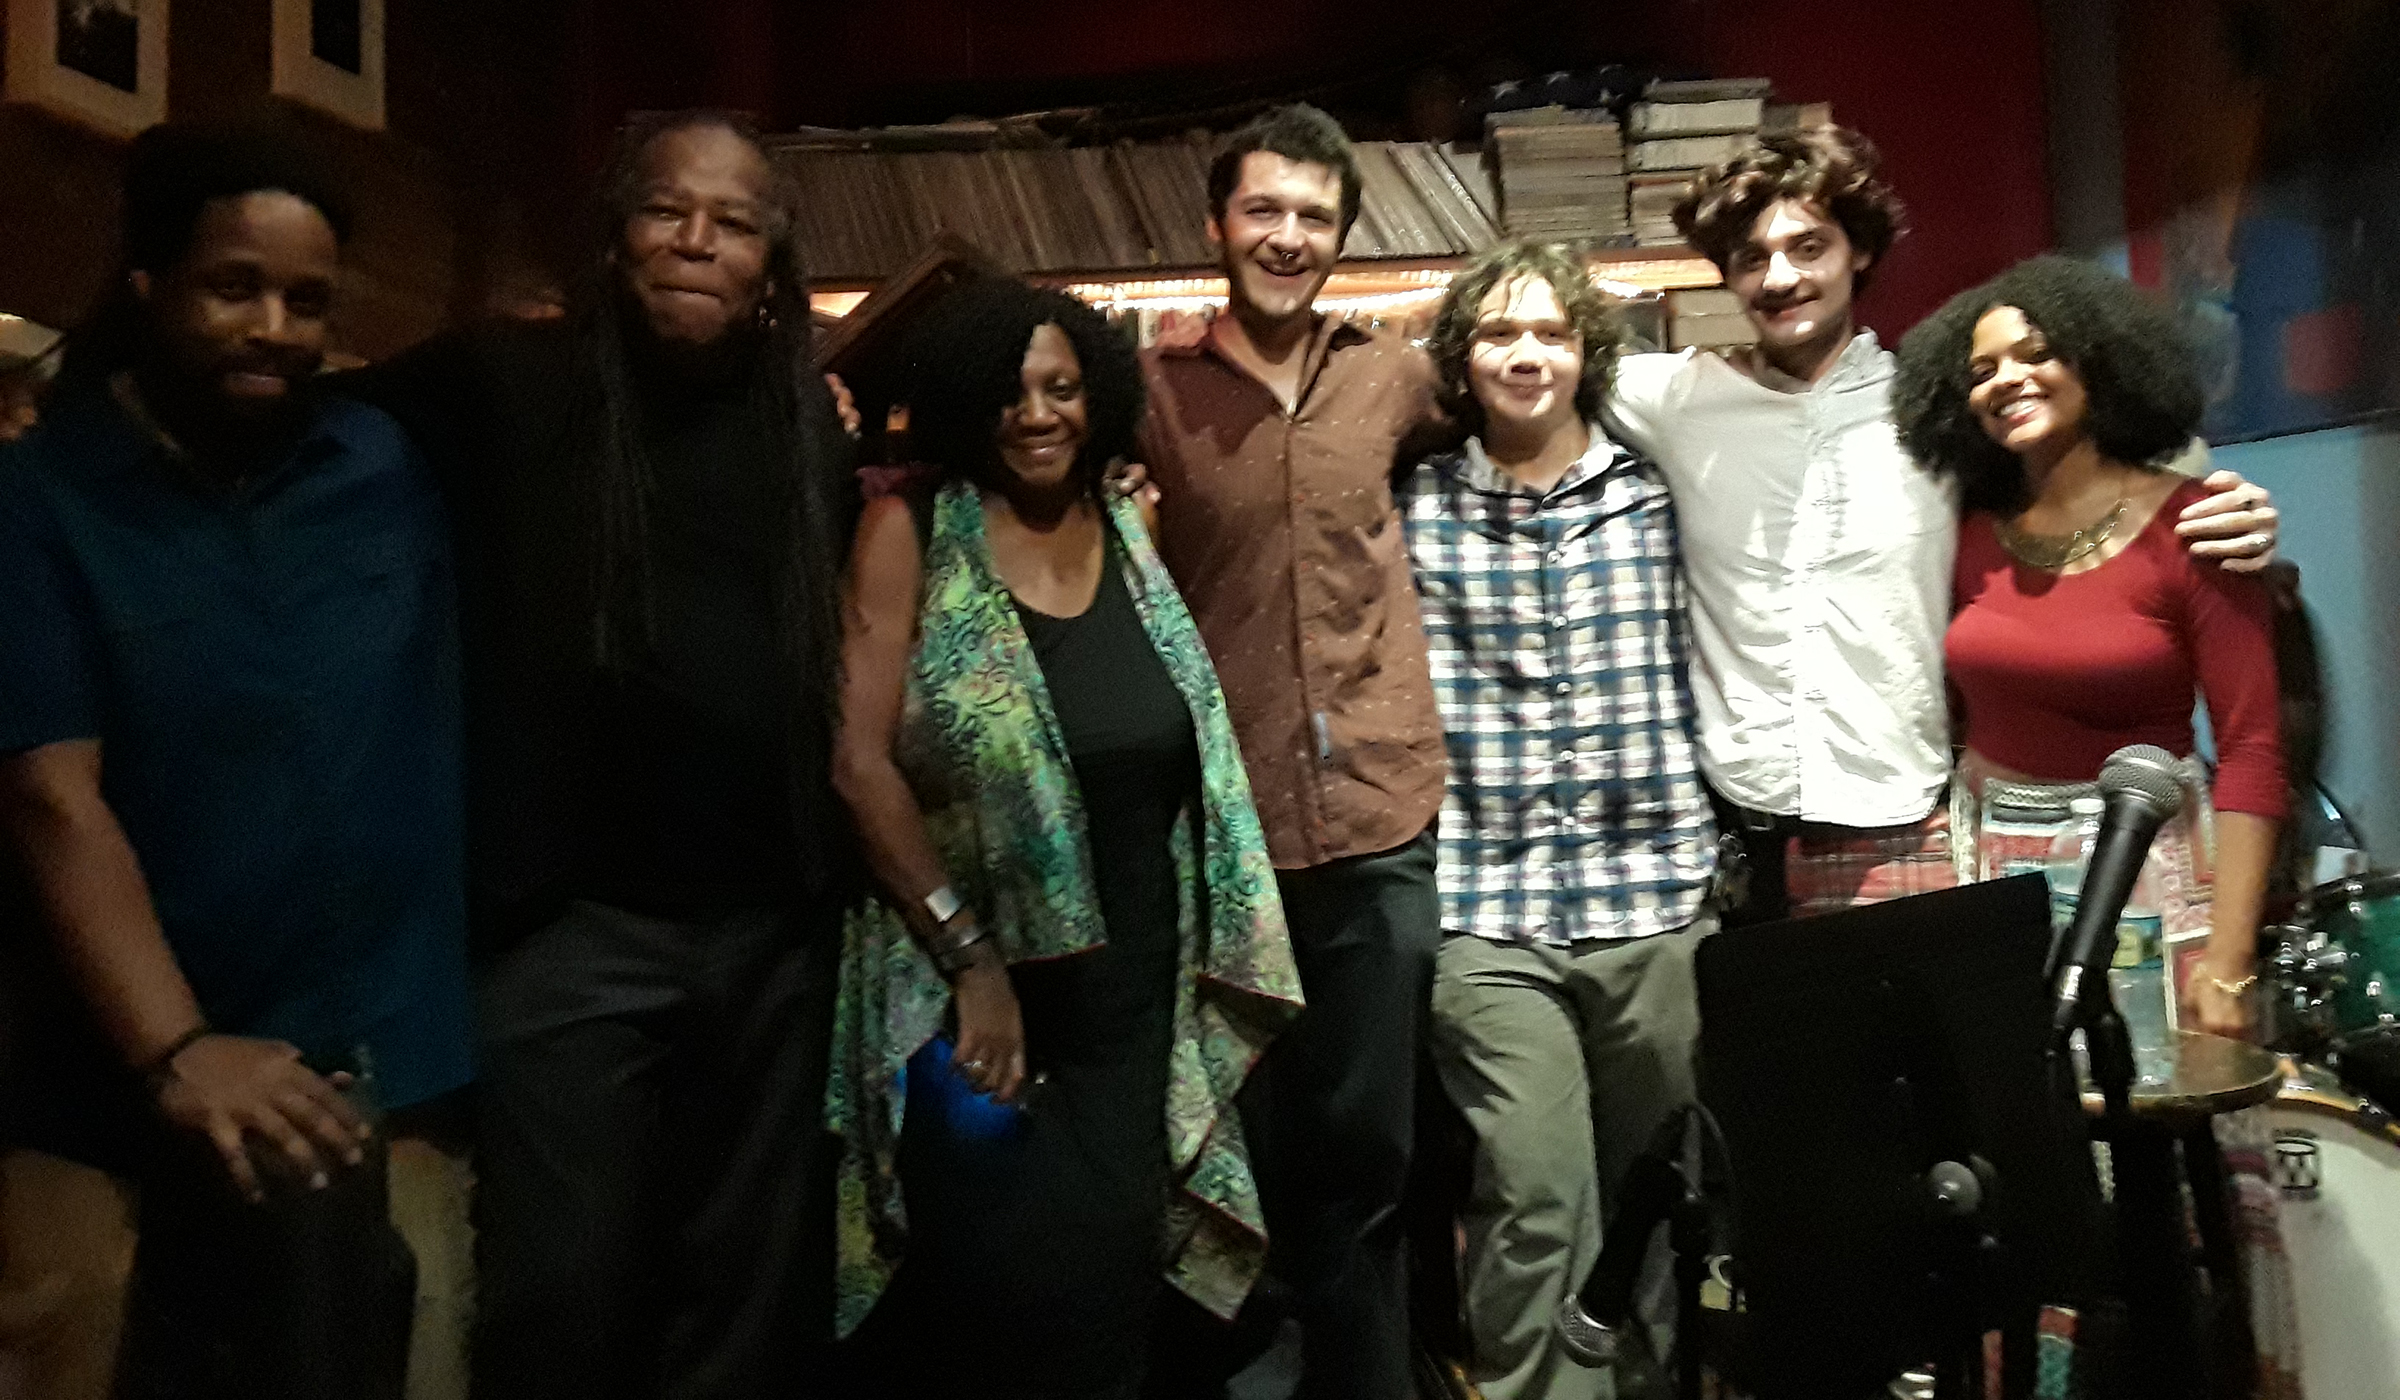 Monique with band at Williamsburg Music
              Center, fall 2018